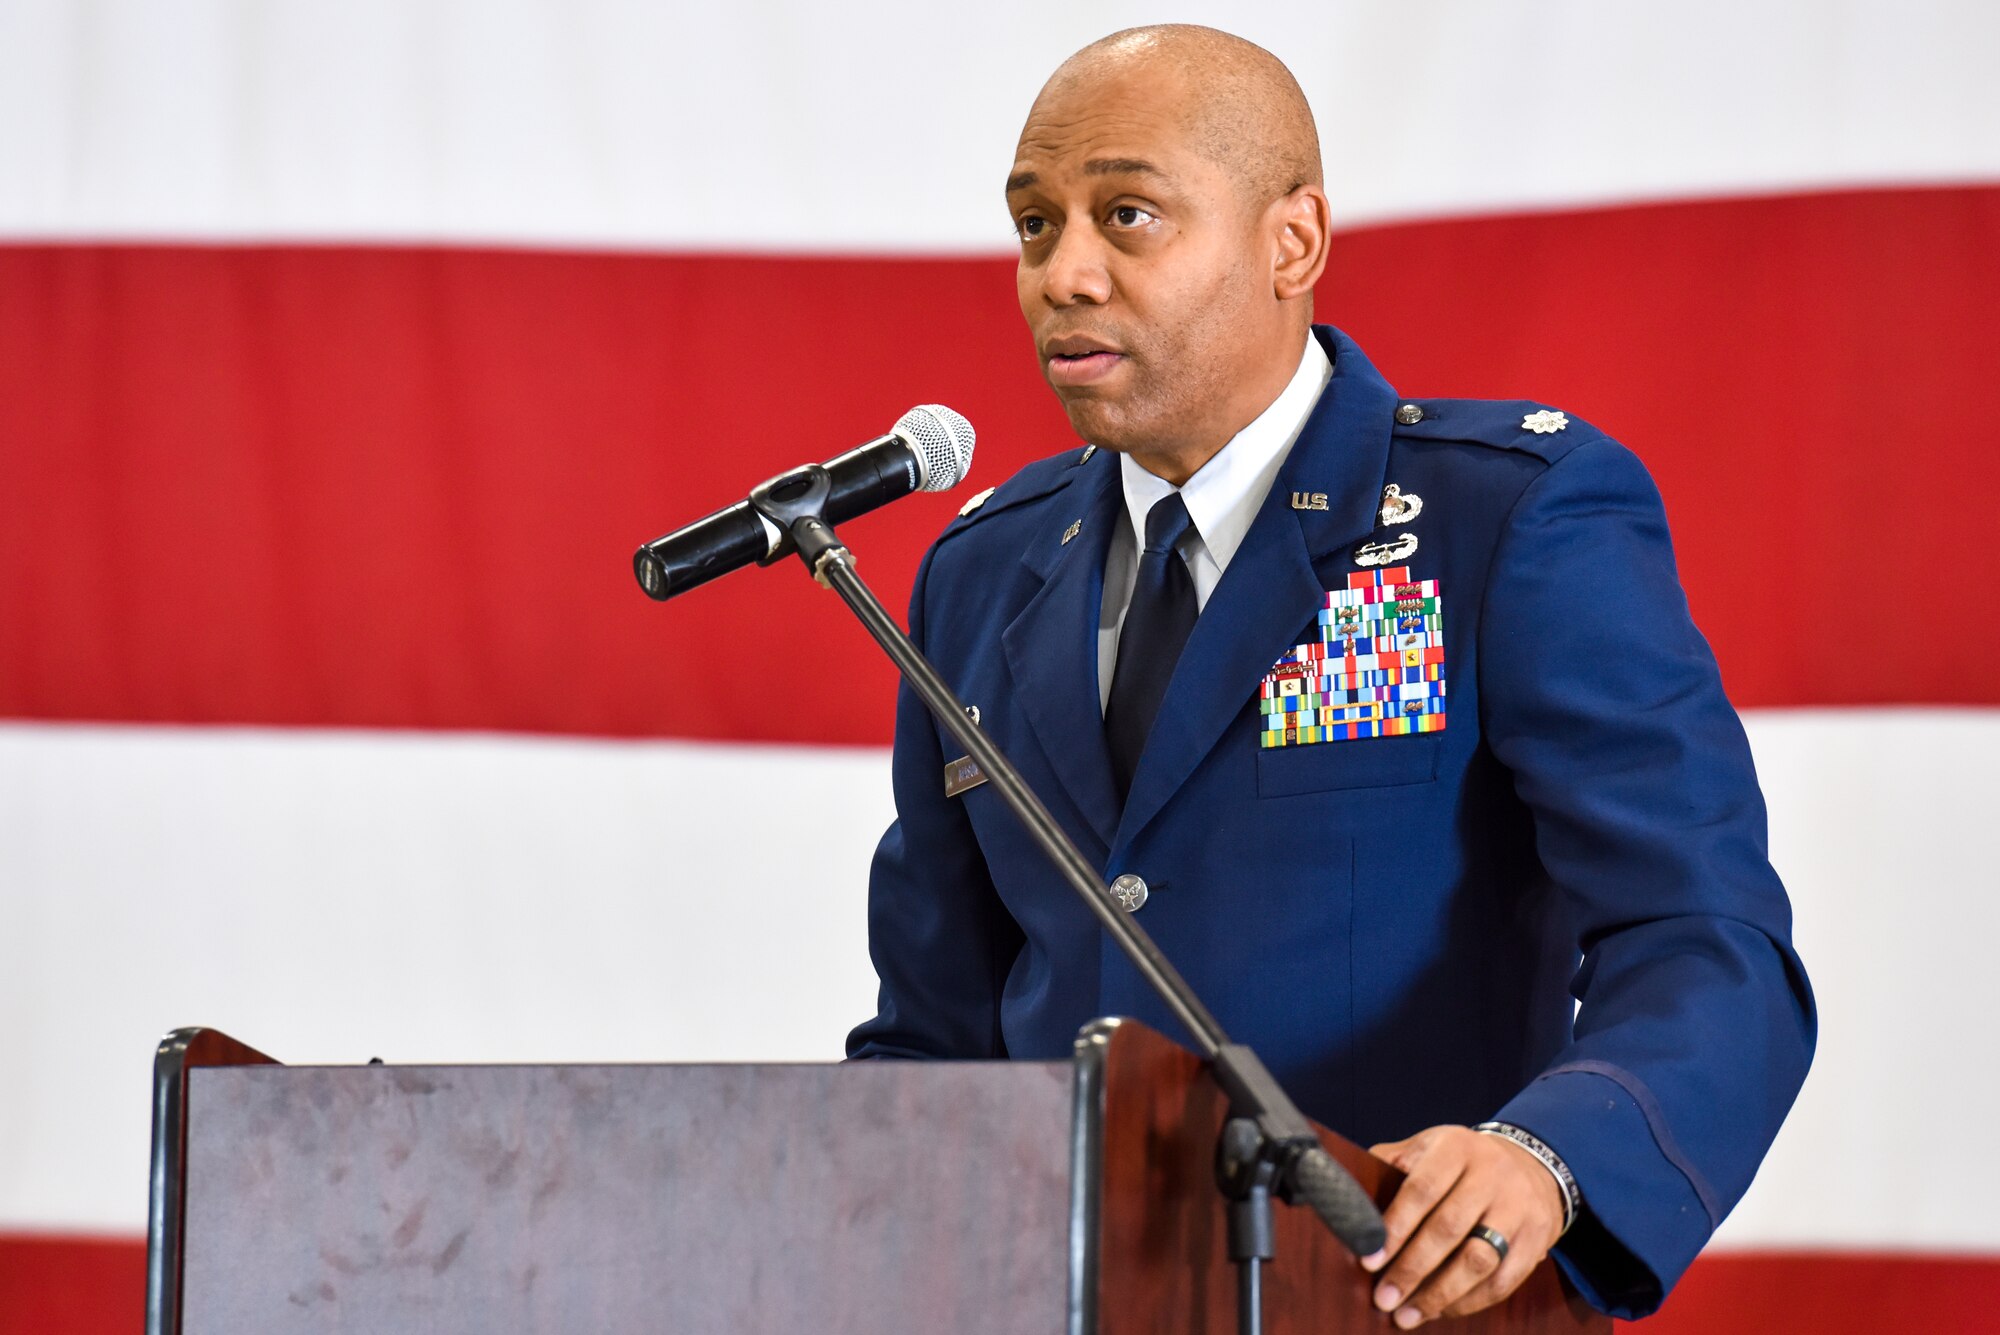 U.S. Air Force Lt. Col. Erwin Mason, 316th Training Squadron commander, delivers opening remark during the Juneteenth commemoration ceremony at Goodfellow Air Force Base, Texas, June 16, 2022. Mason took command of the 316th TRS last year on the Juneteenth holiday. (U.S. Air Force photo by Staff Sgt. Jermaine Ayers)